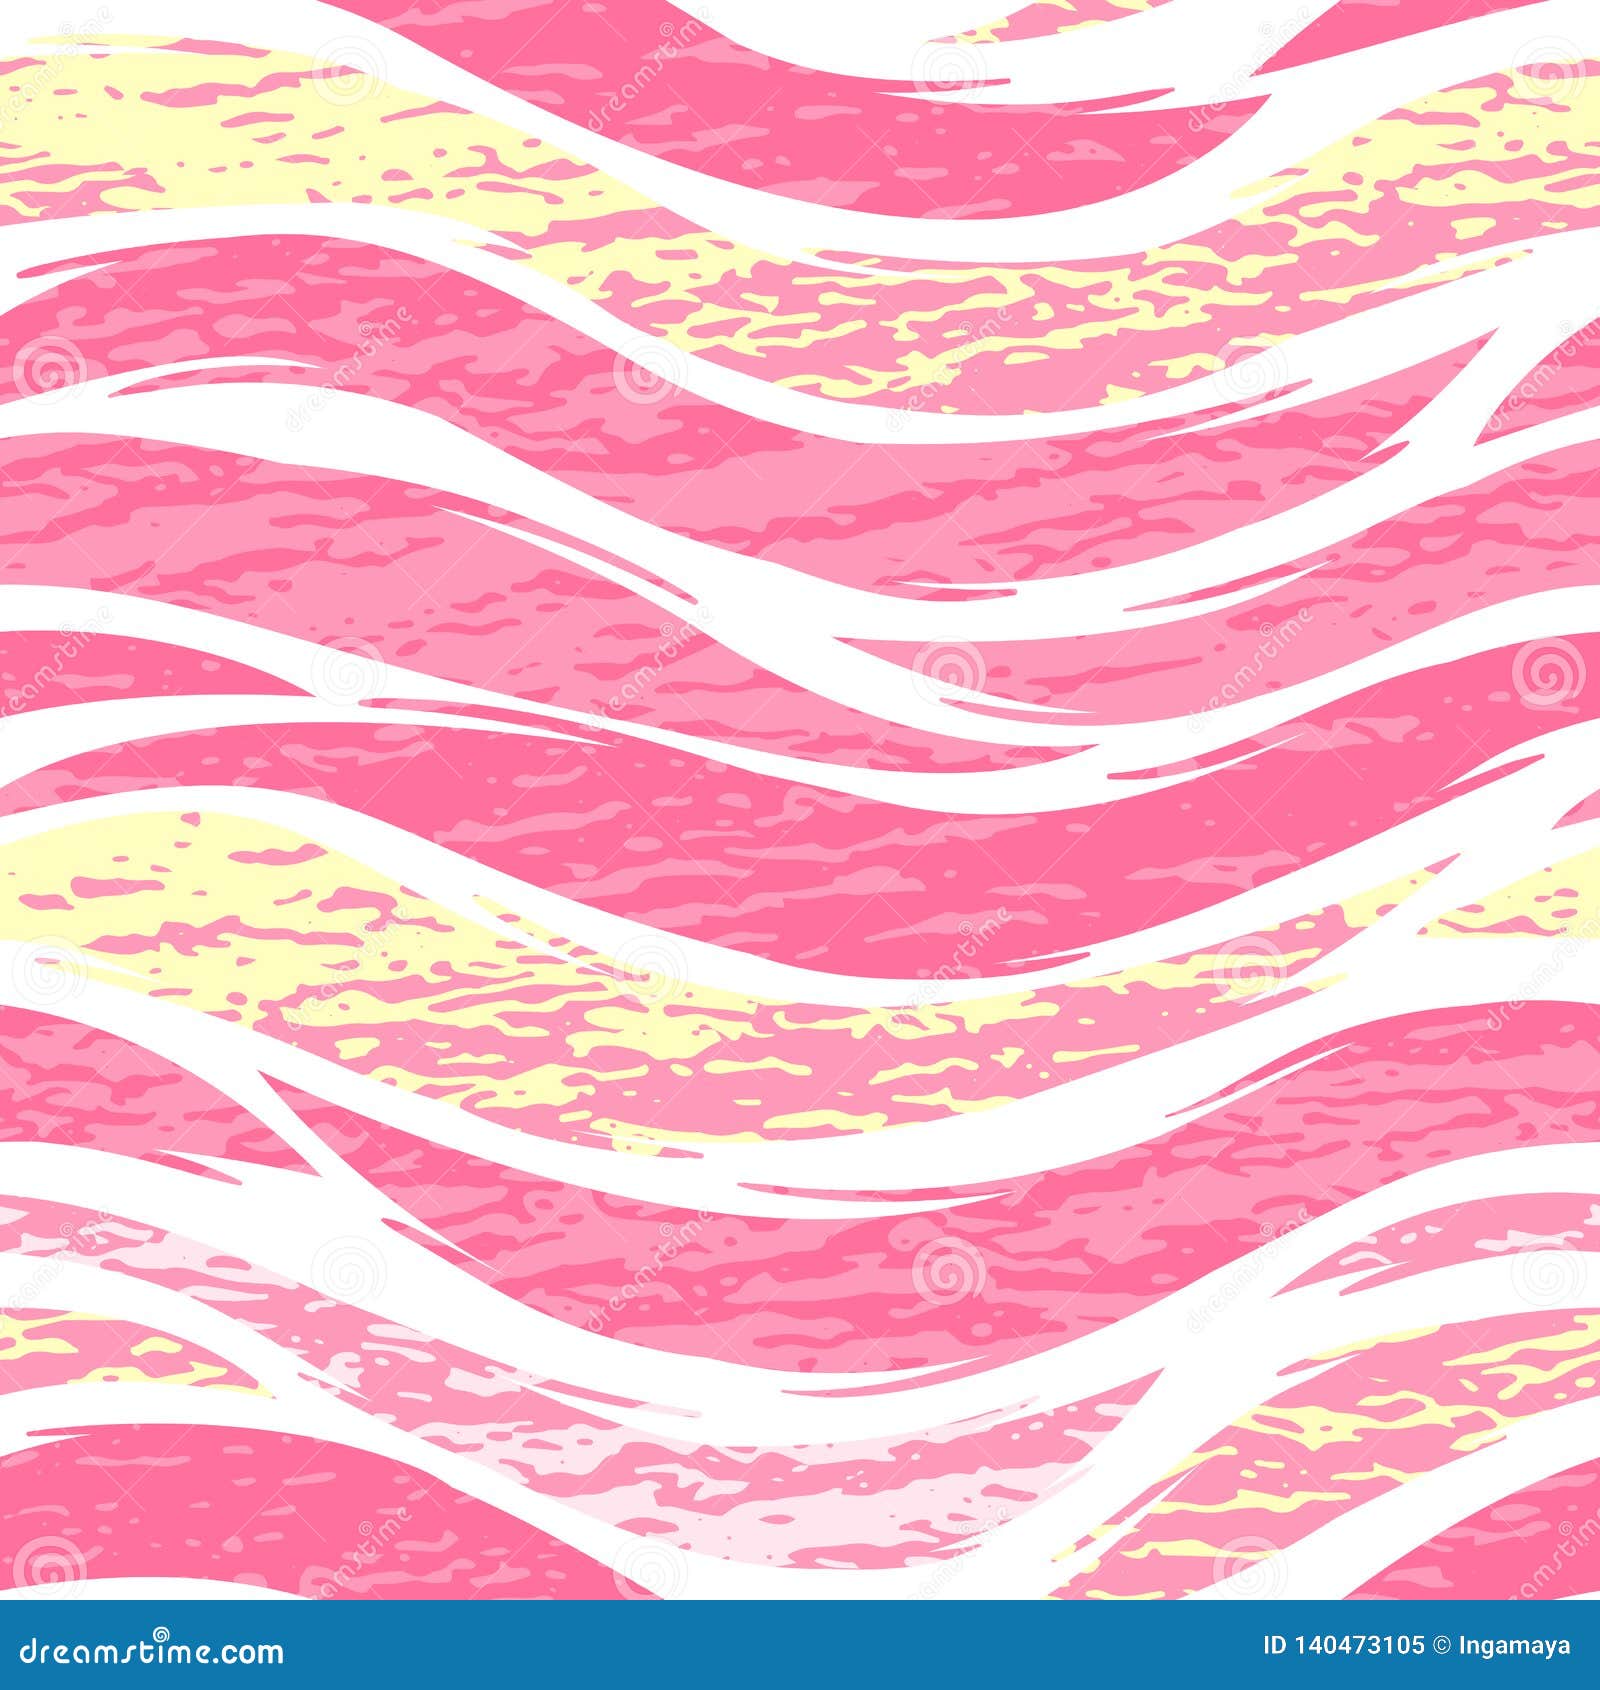 abstract girly seamless pattern.  pink wavy stripes texture  on white background.